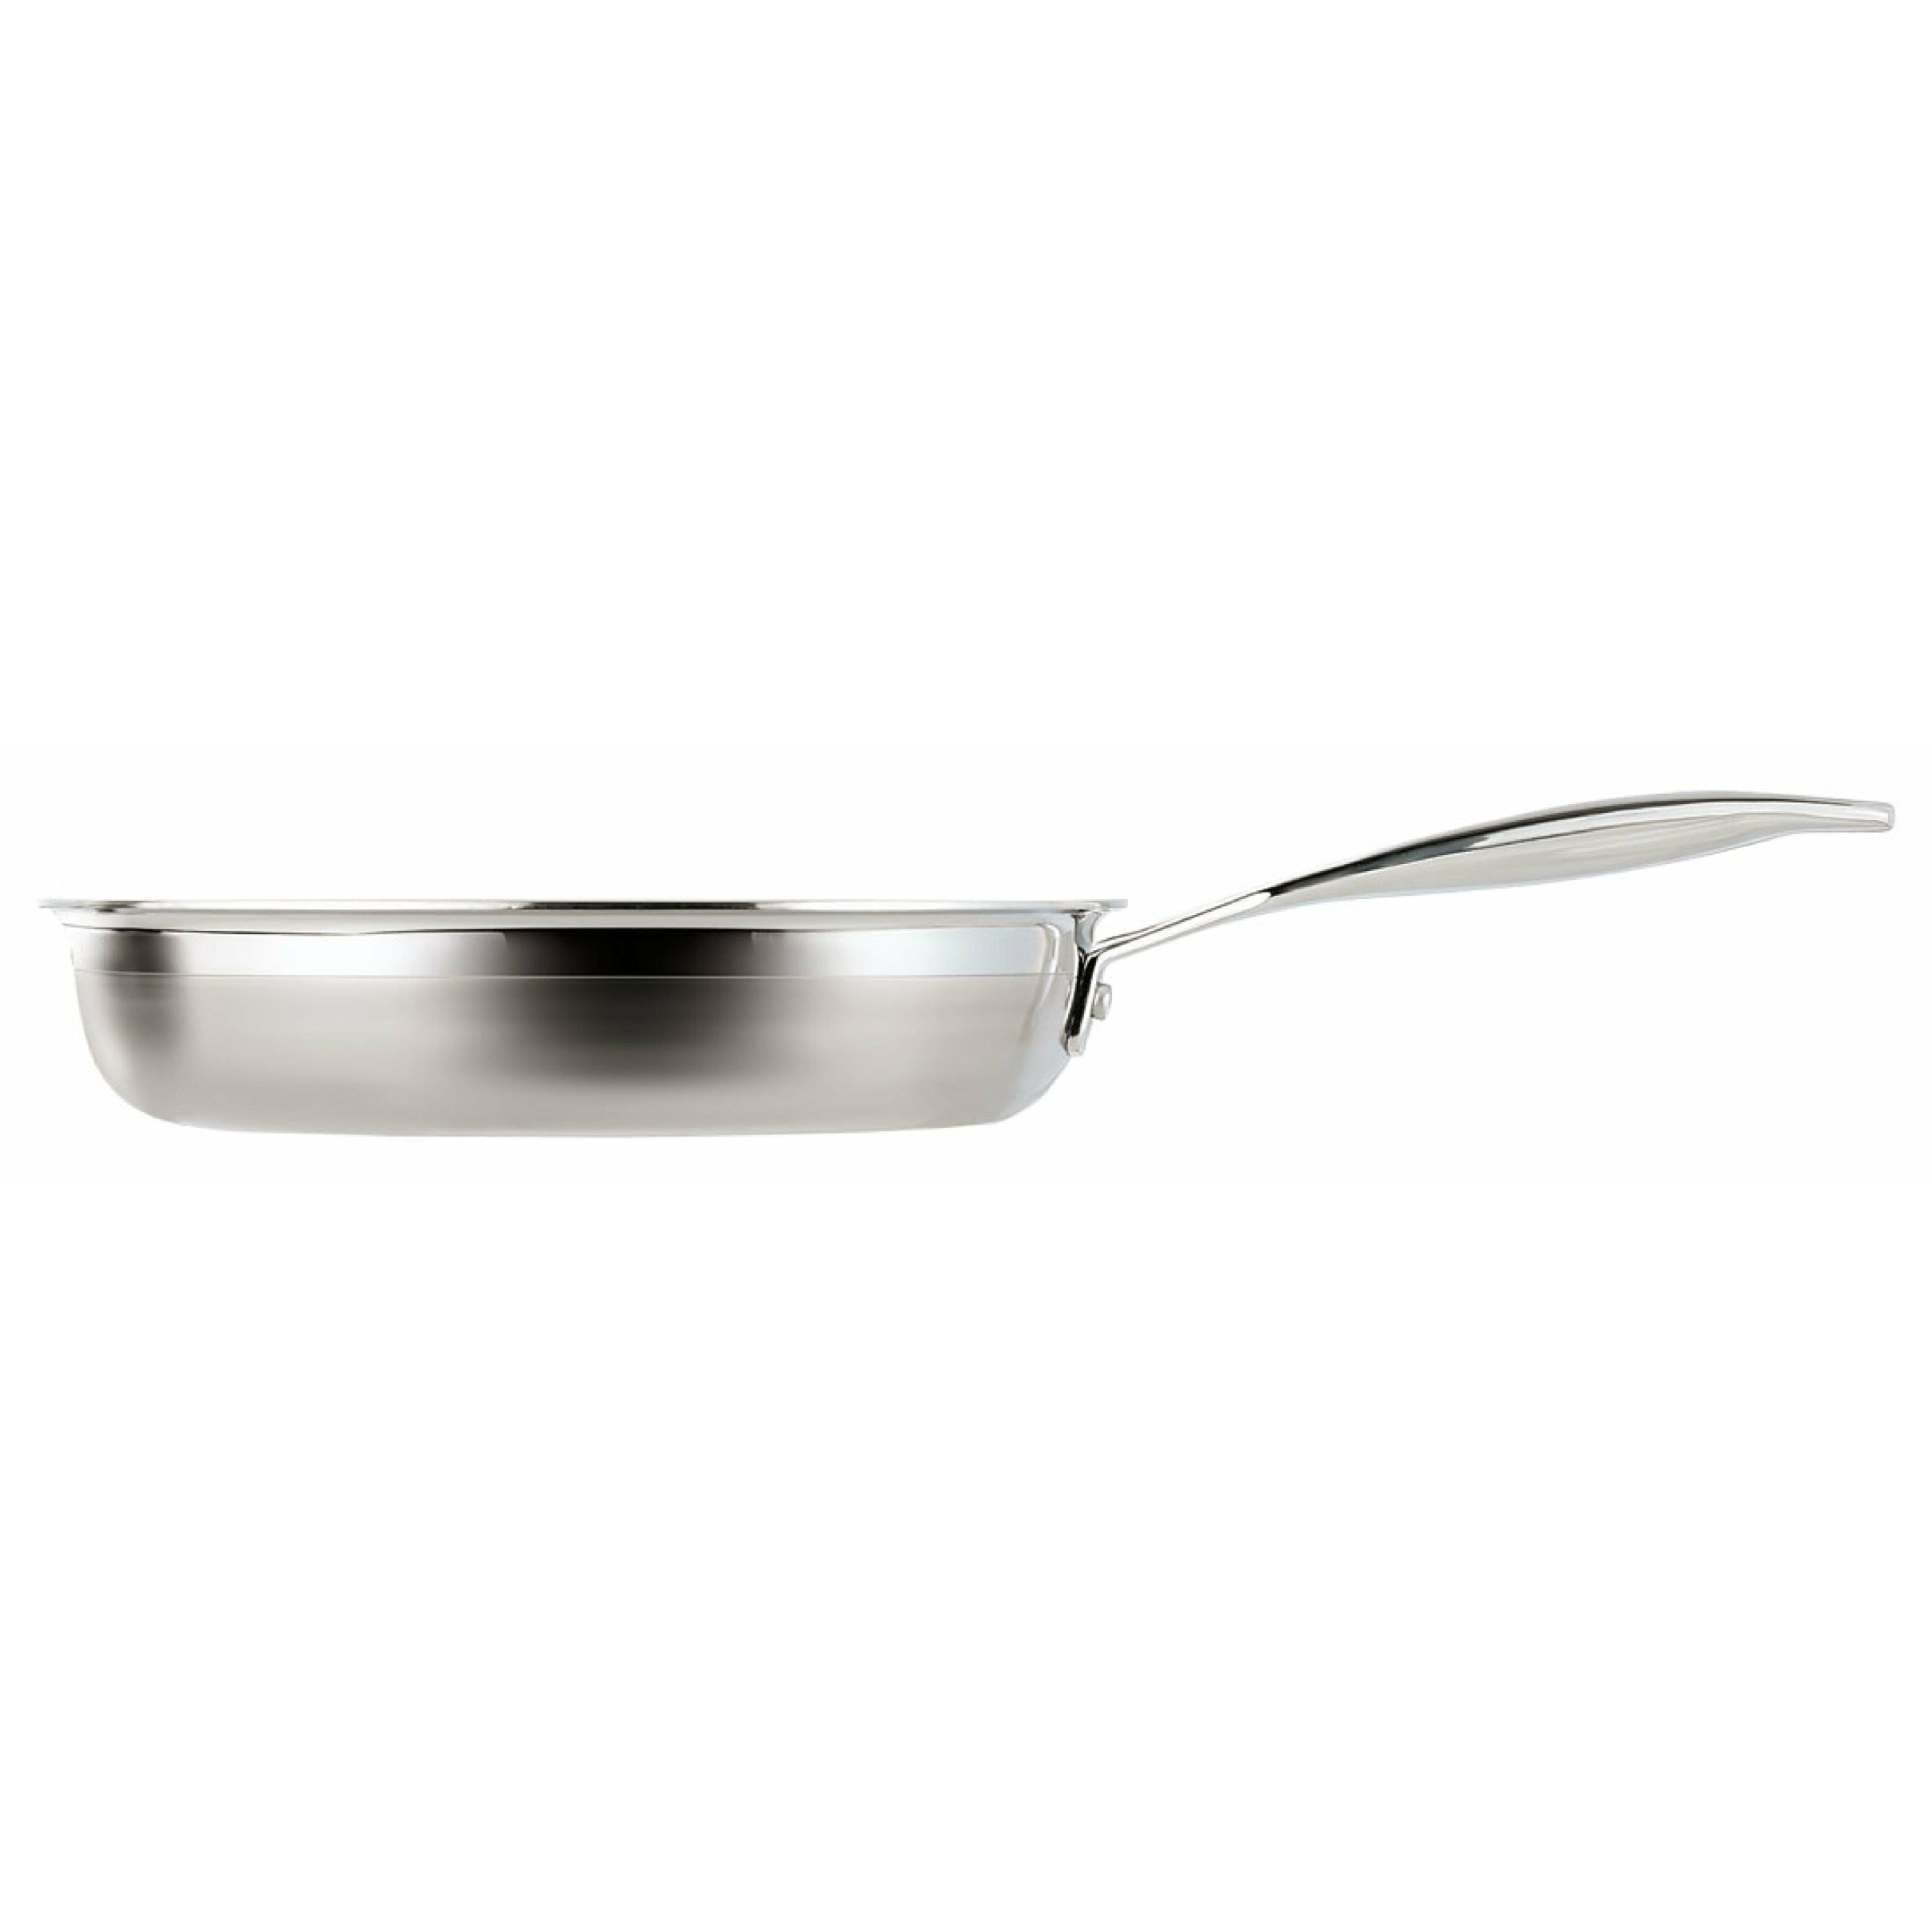 Le Creuset 3 Ply Stainless Steel Non Stick Frying Pan, 24 Cm